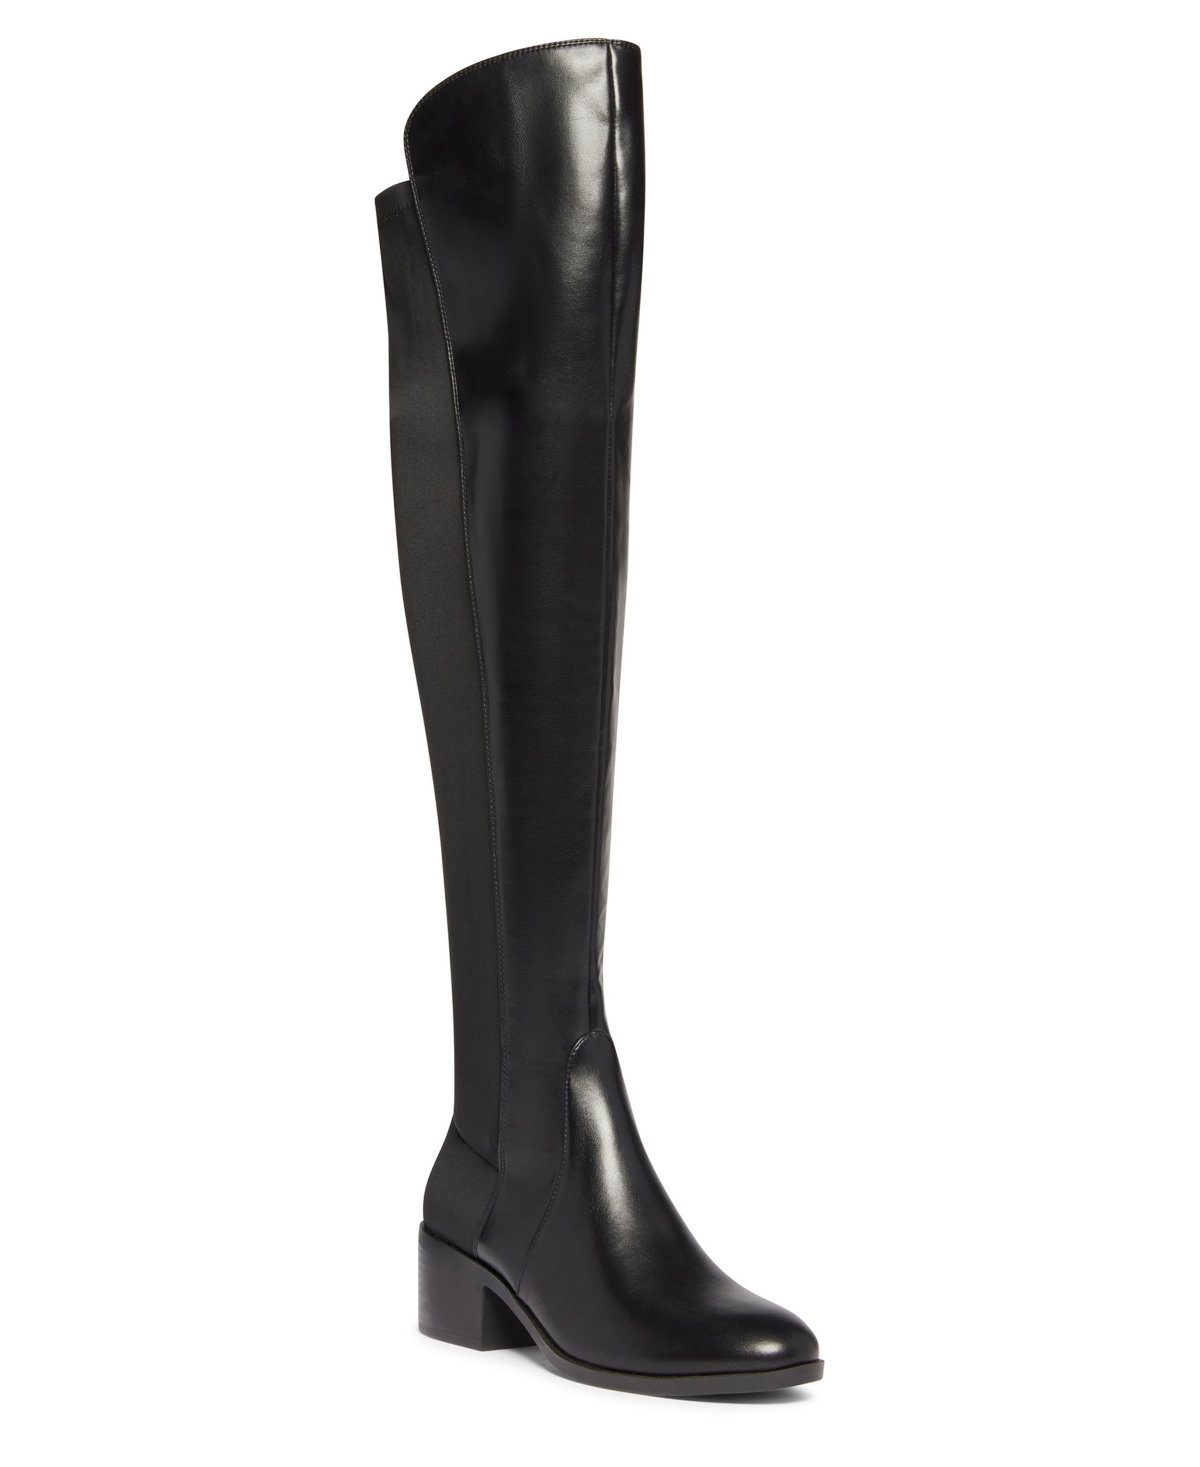 Women's Adrenna Round Toe Over-the-Knee Boots - Black Smooth